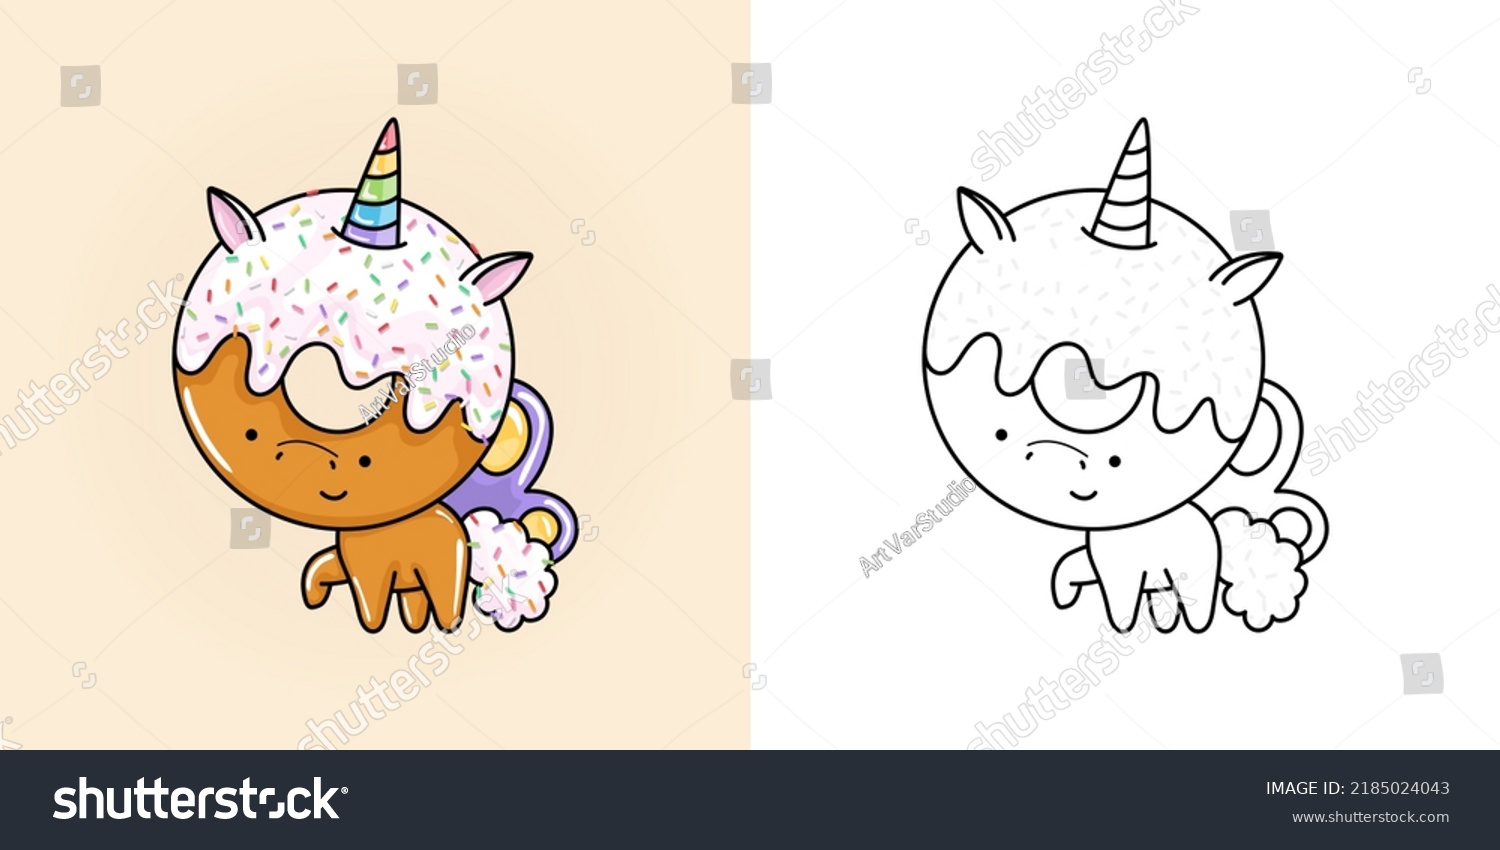 SVG of Clipart Unicorn Multicolored and Black and White. Cute Clip Art Unicorn Donut. Vector Illustration of a Kawaii Animal for Stickers, Baby Shower, Coloring Pages, Prints for Clothes.
 svg